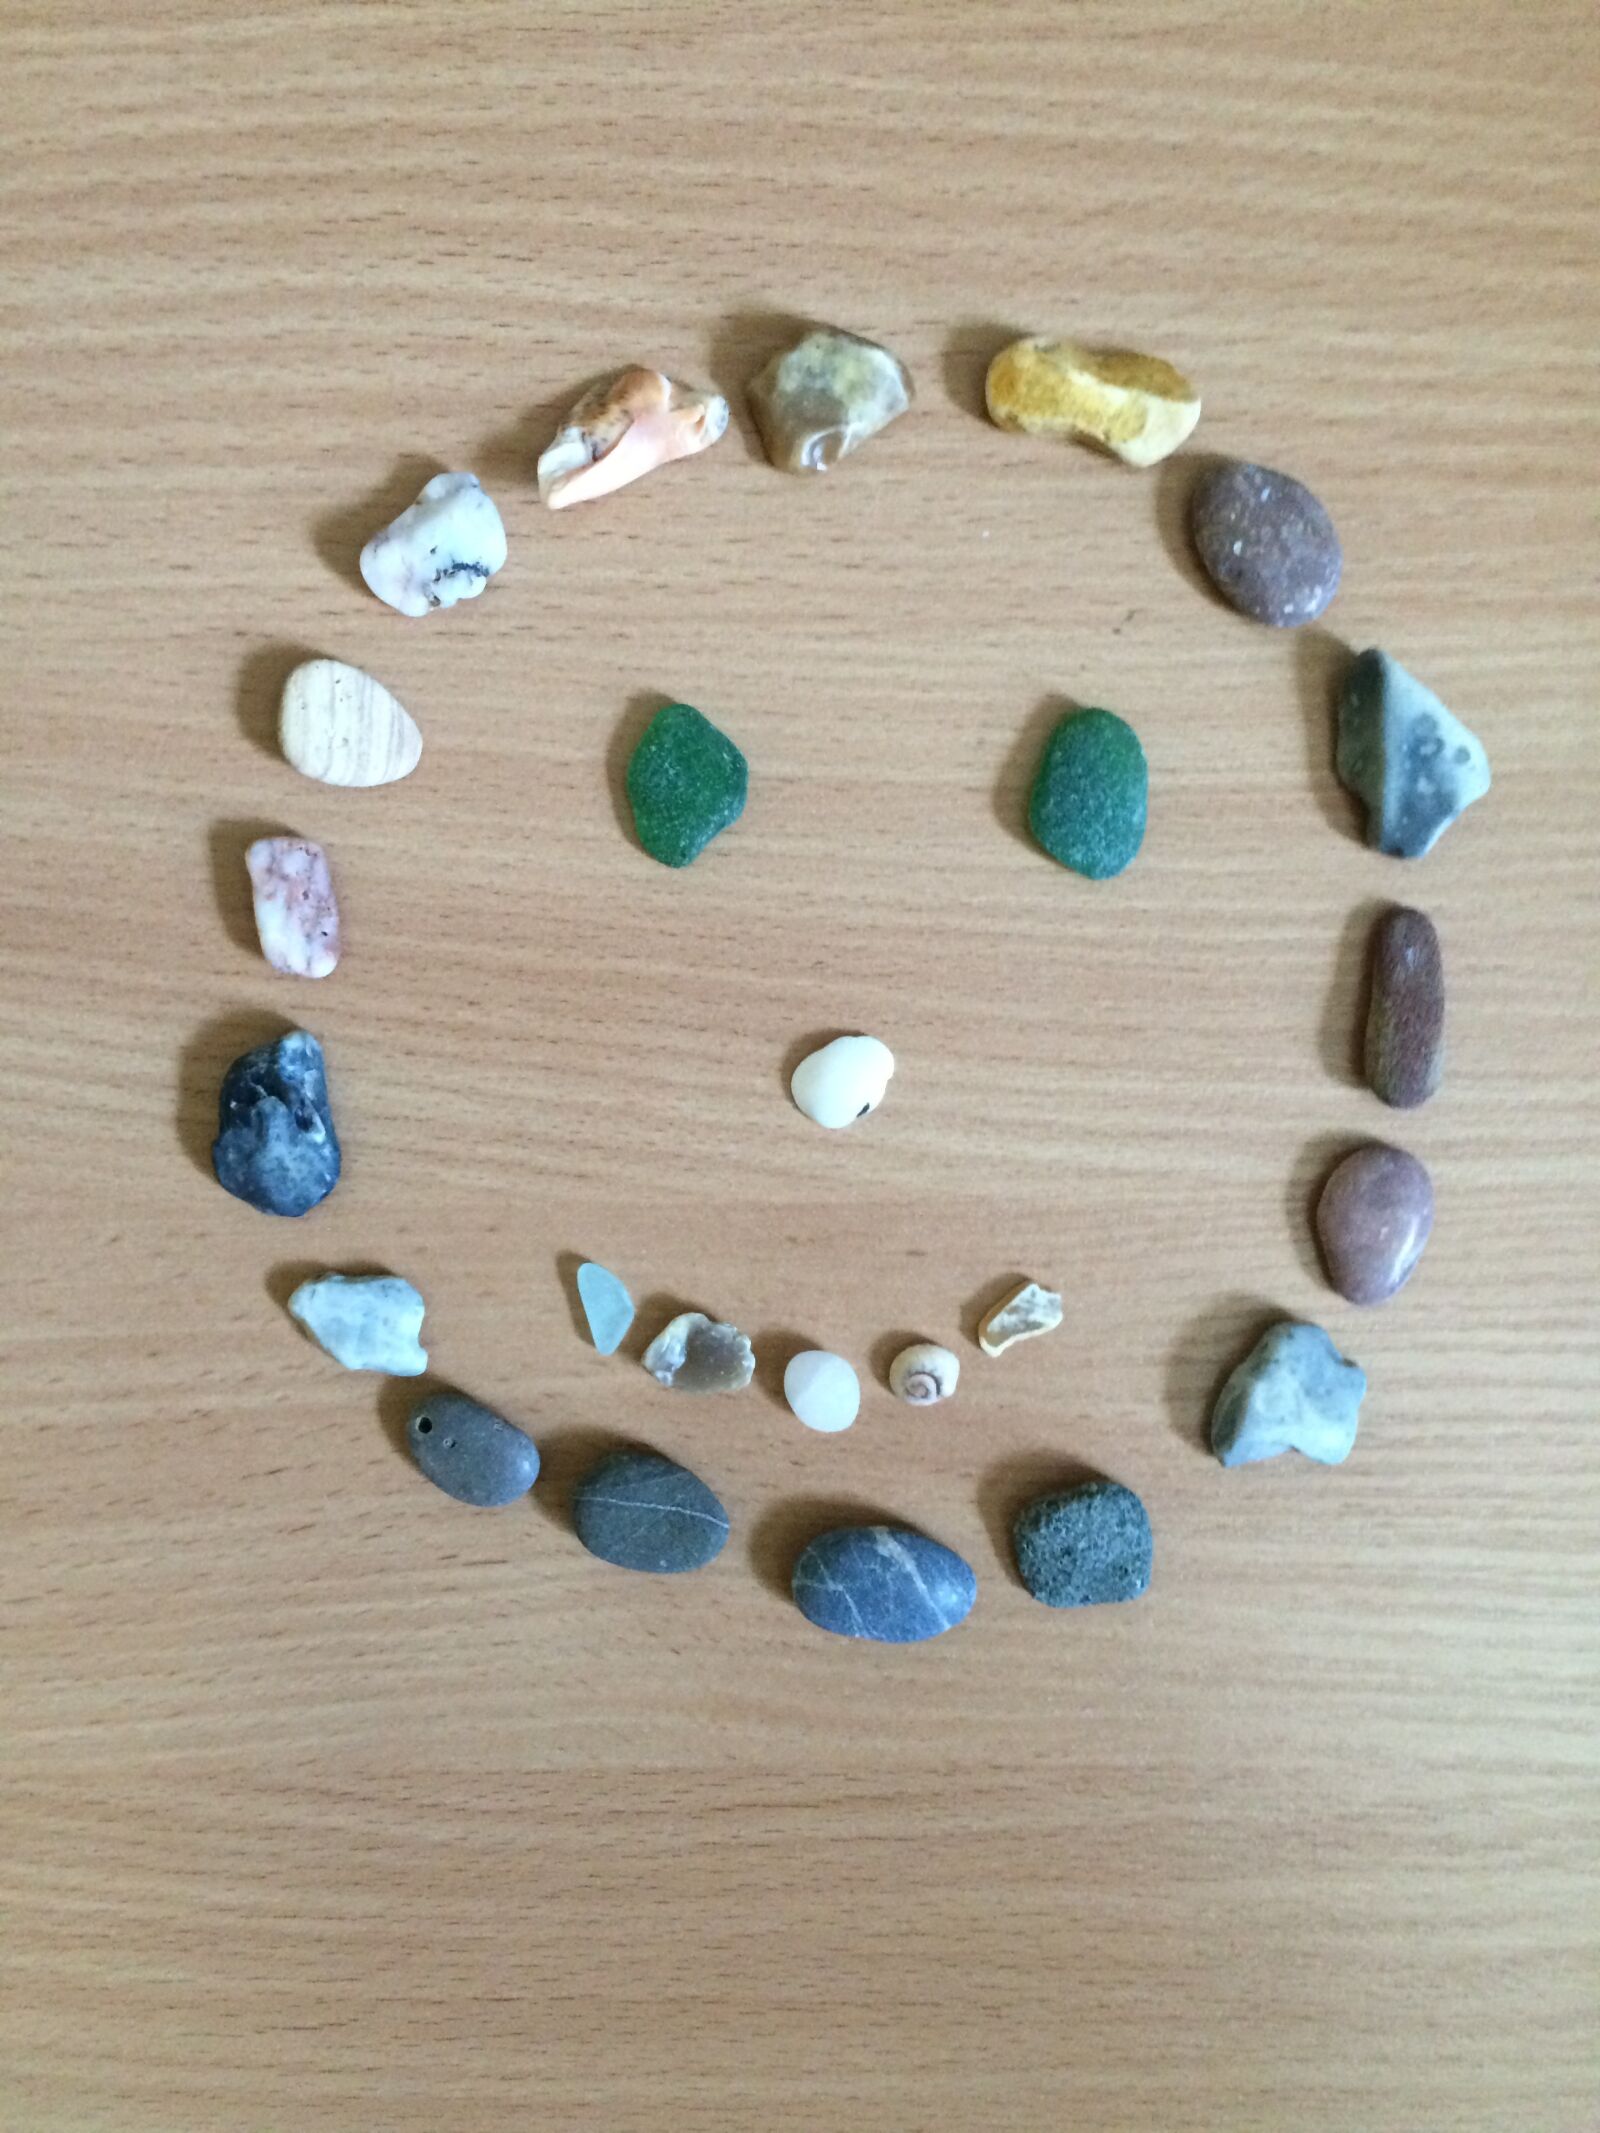 Apple iPhone 5s sample photo. Pebbles, smile, smiley photography